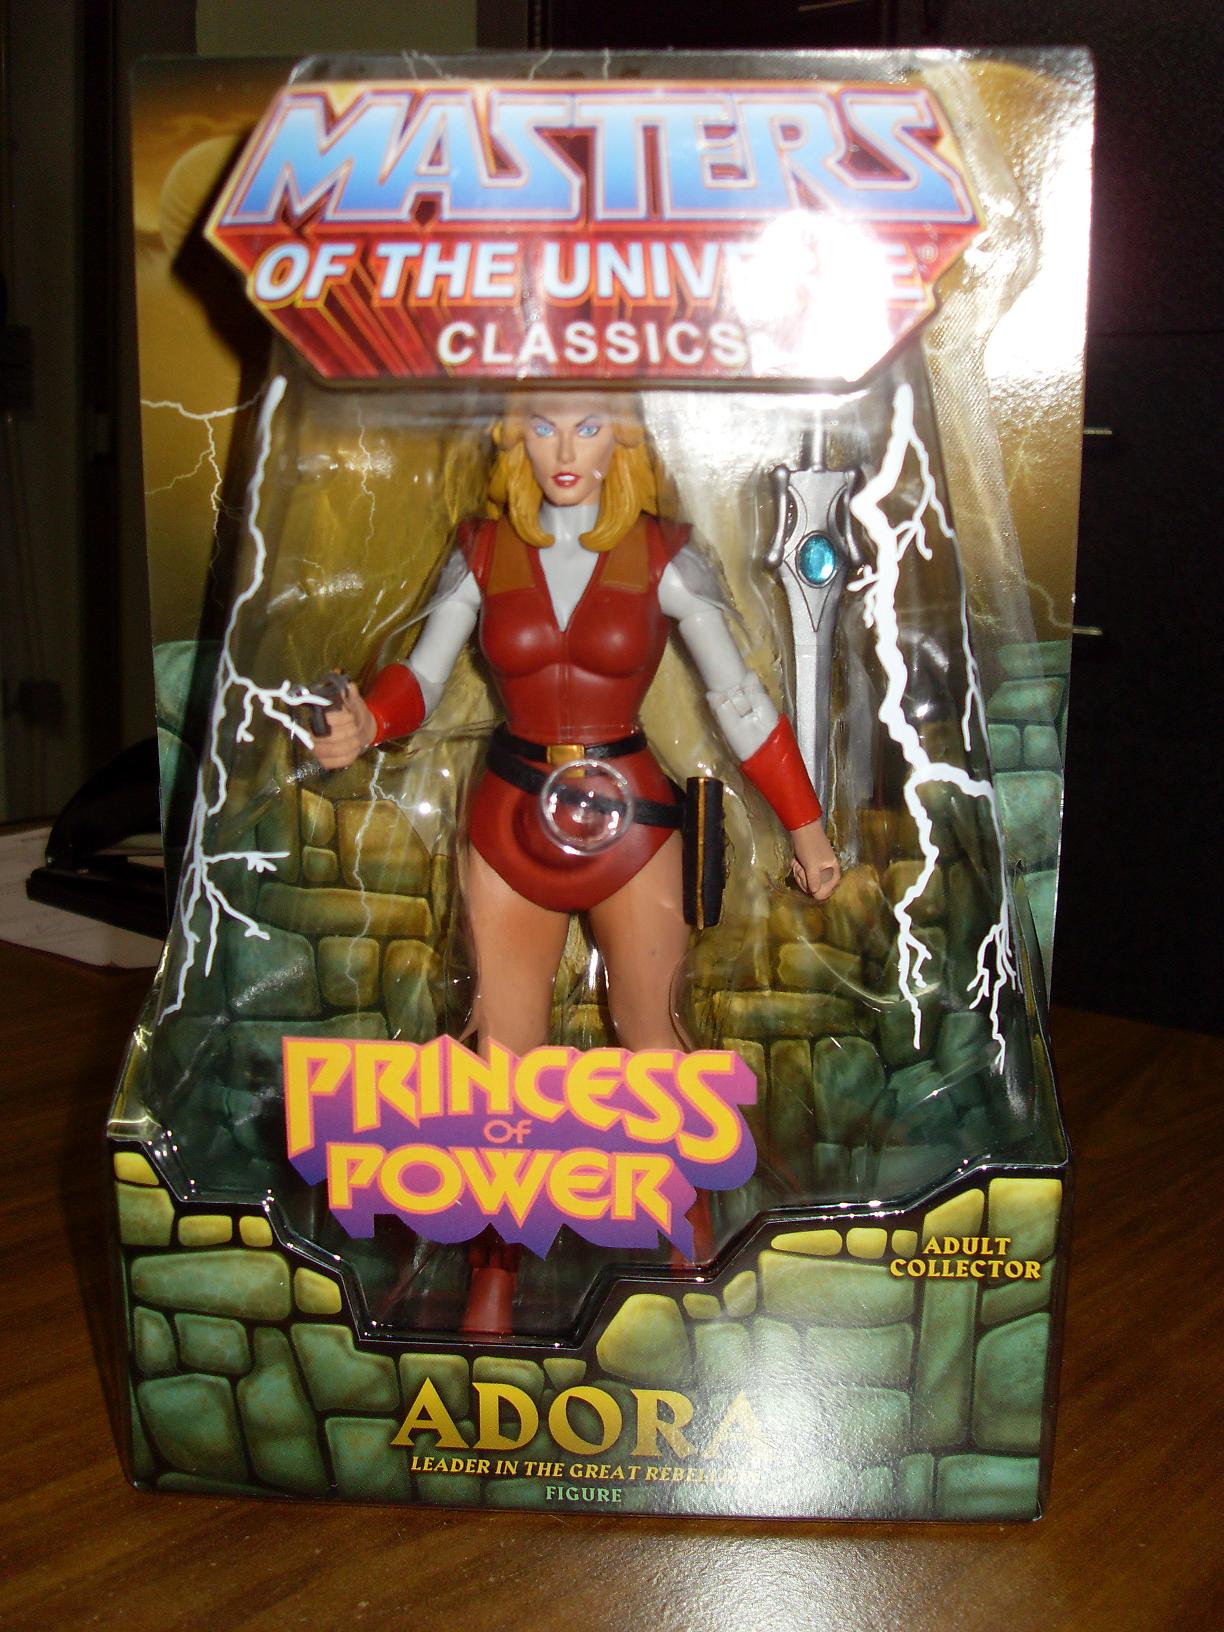 LORD HE-MAN Colecction 8221